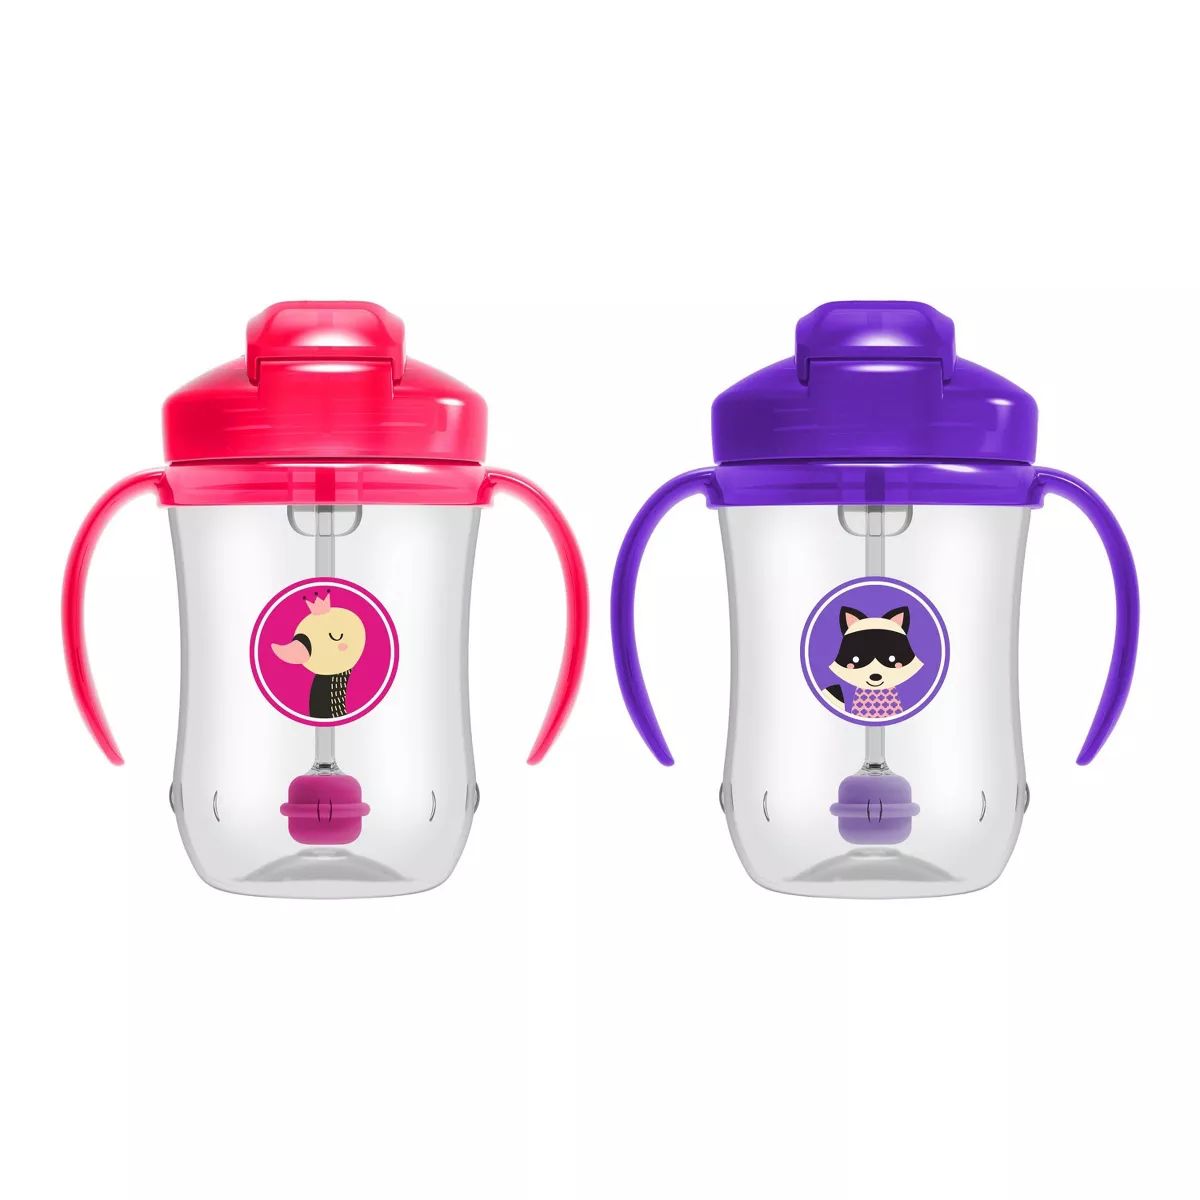 Dr. Brown's Milestones Baby's First Straw Sippy Cup - Pink - 2pk/18oz | Target